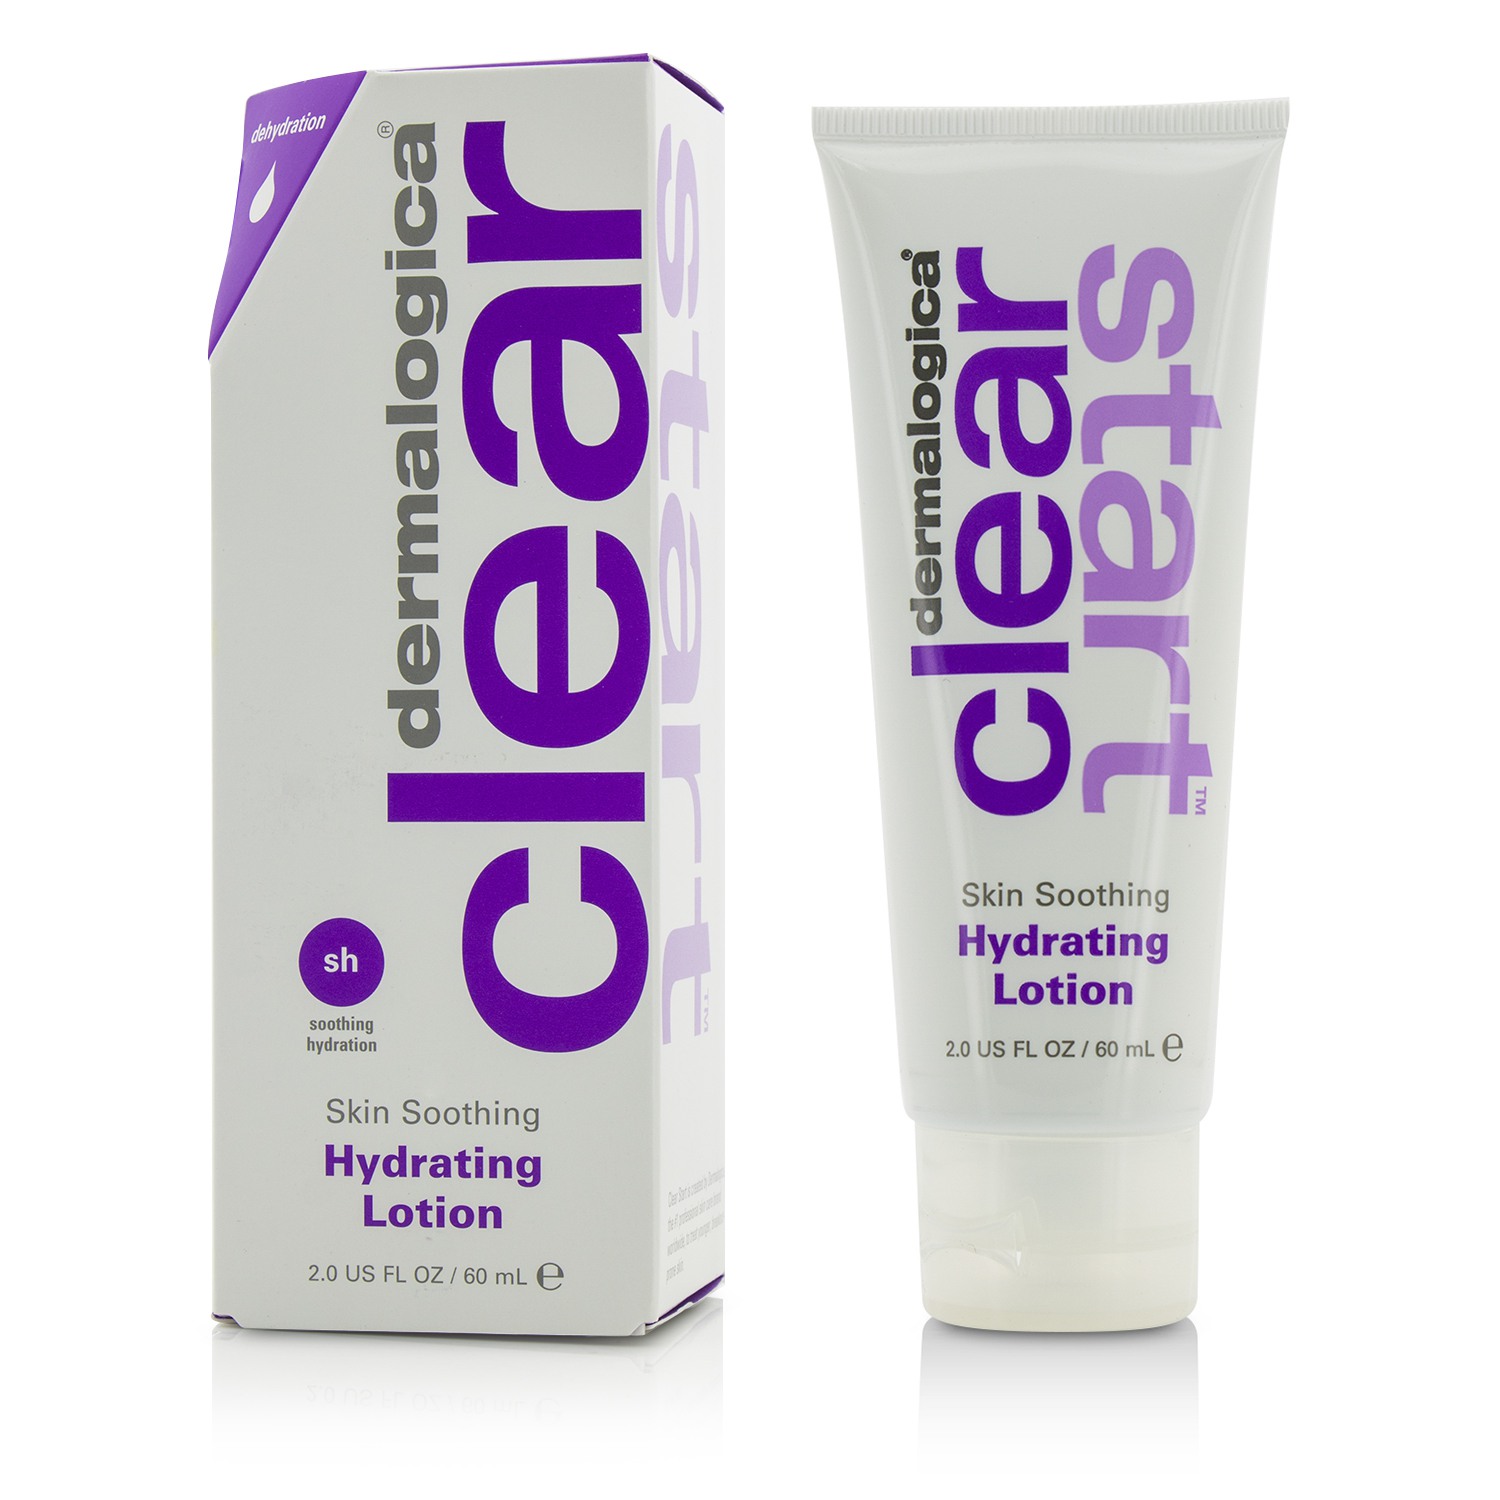 Clear Start Skin Soothing Hydrating Lotion Dermalogica Image